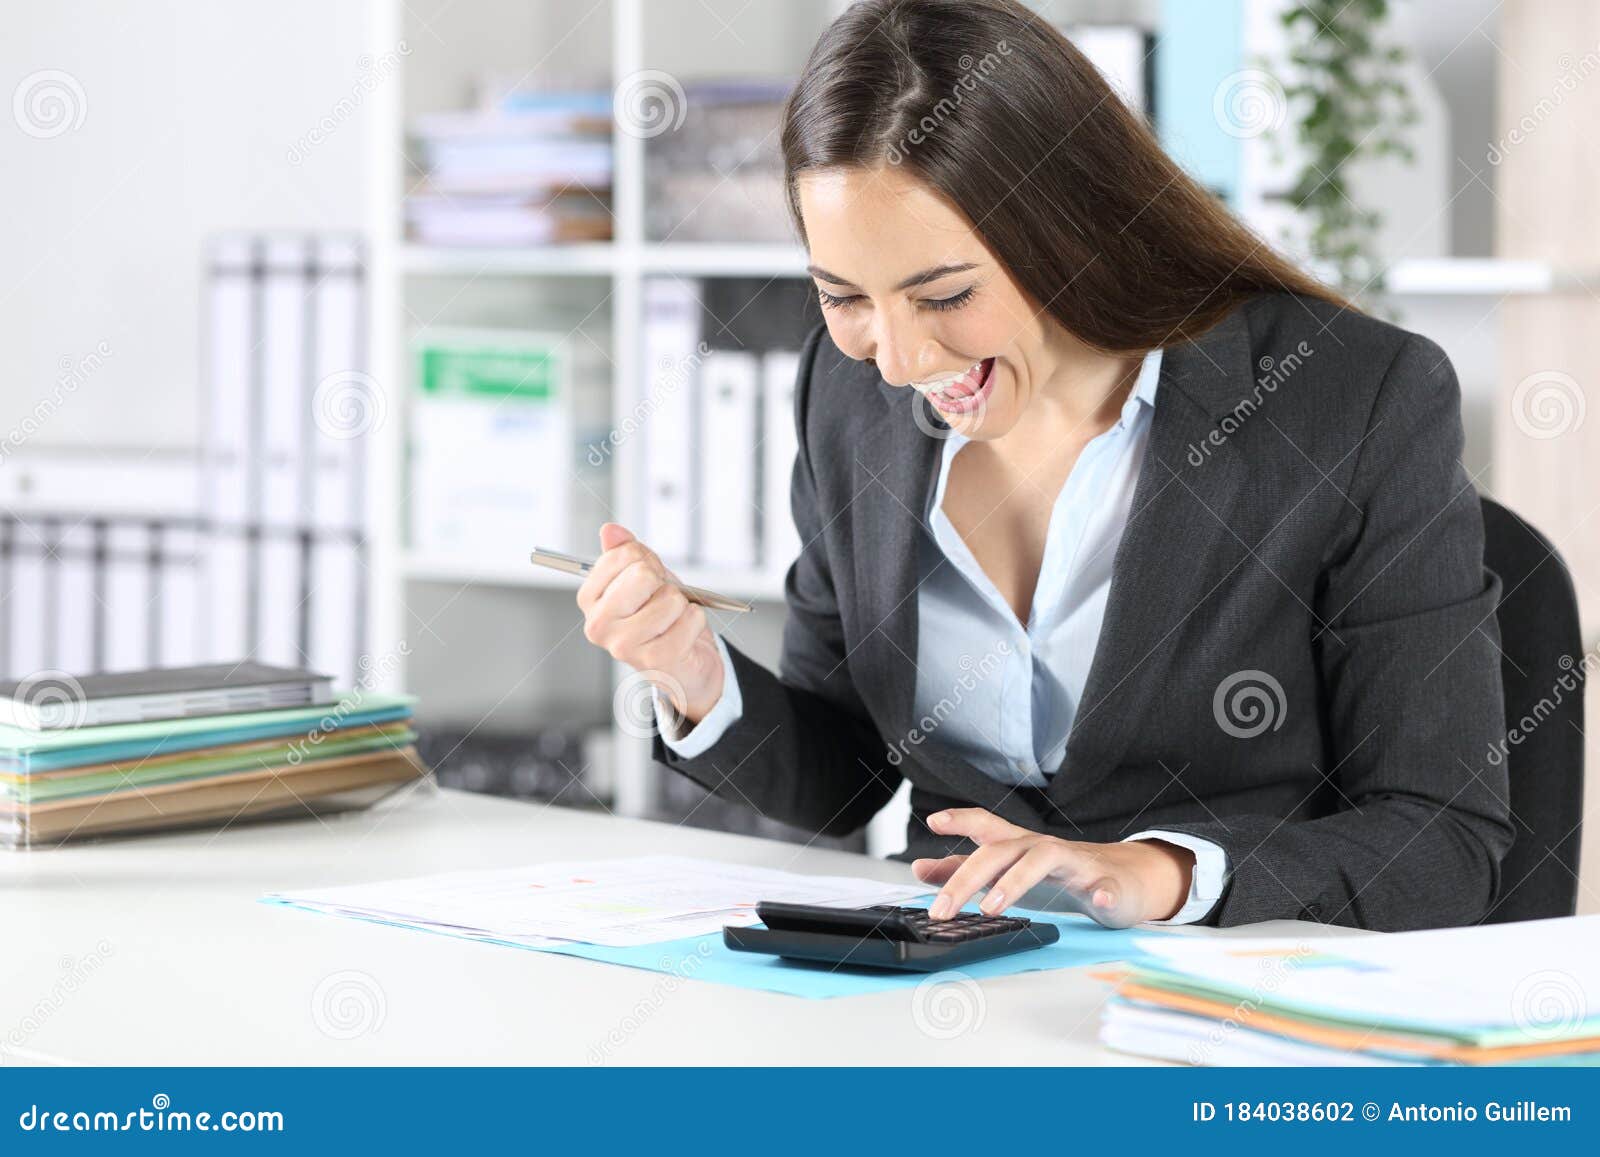 excited bookkeeper checking calculator at office